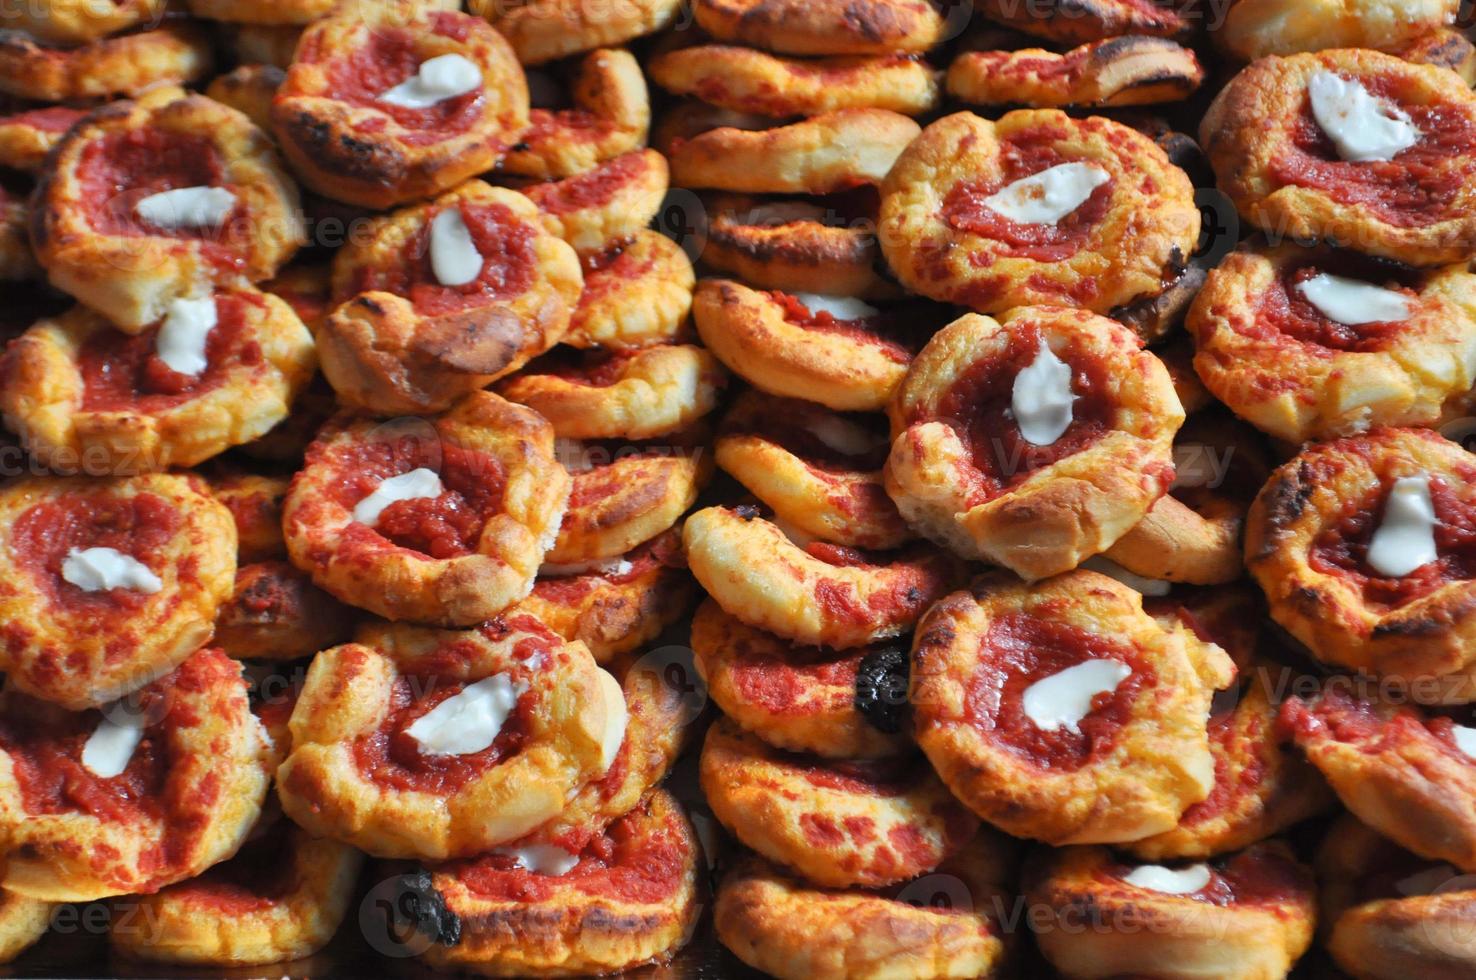 pizzette small pizza baked food photo